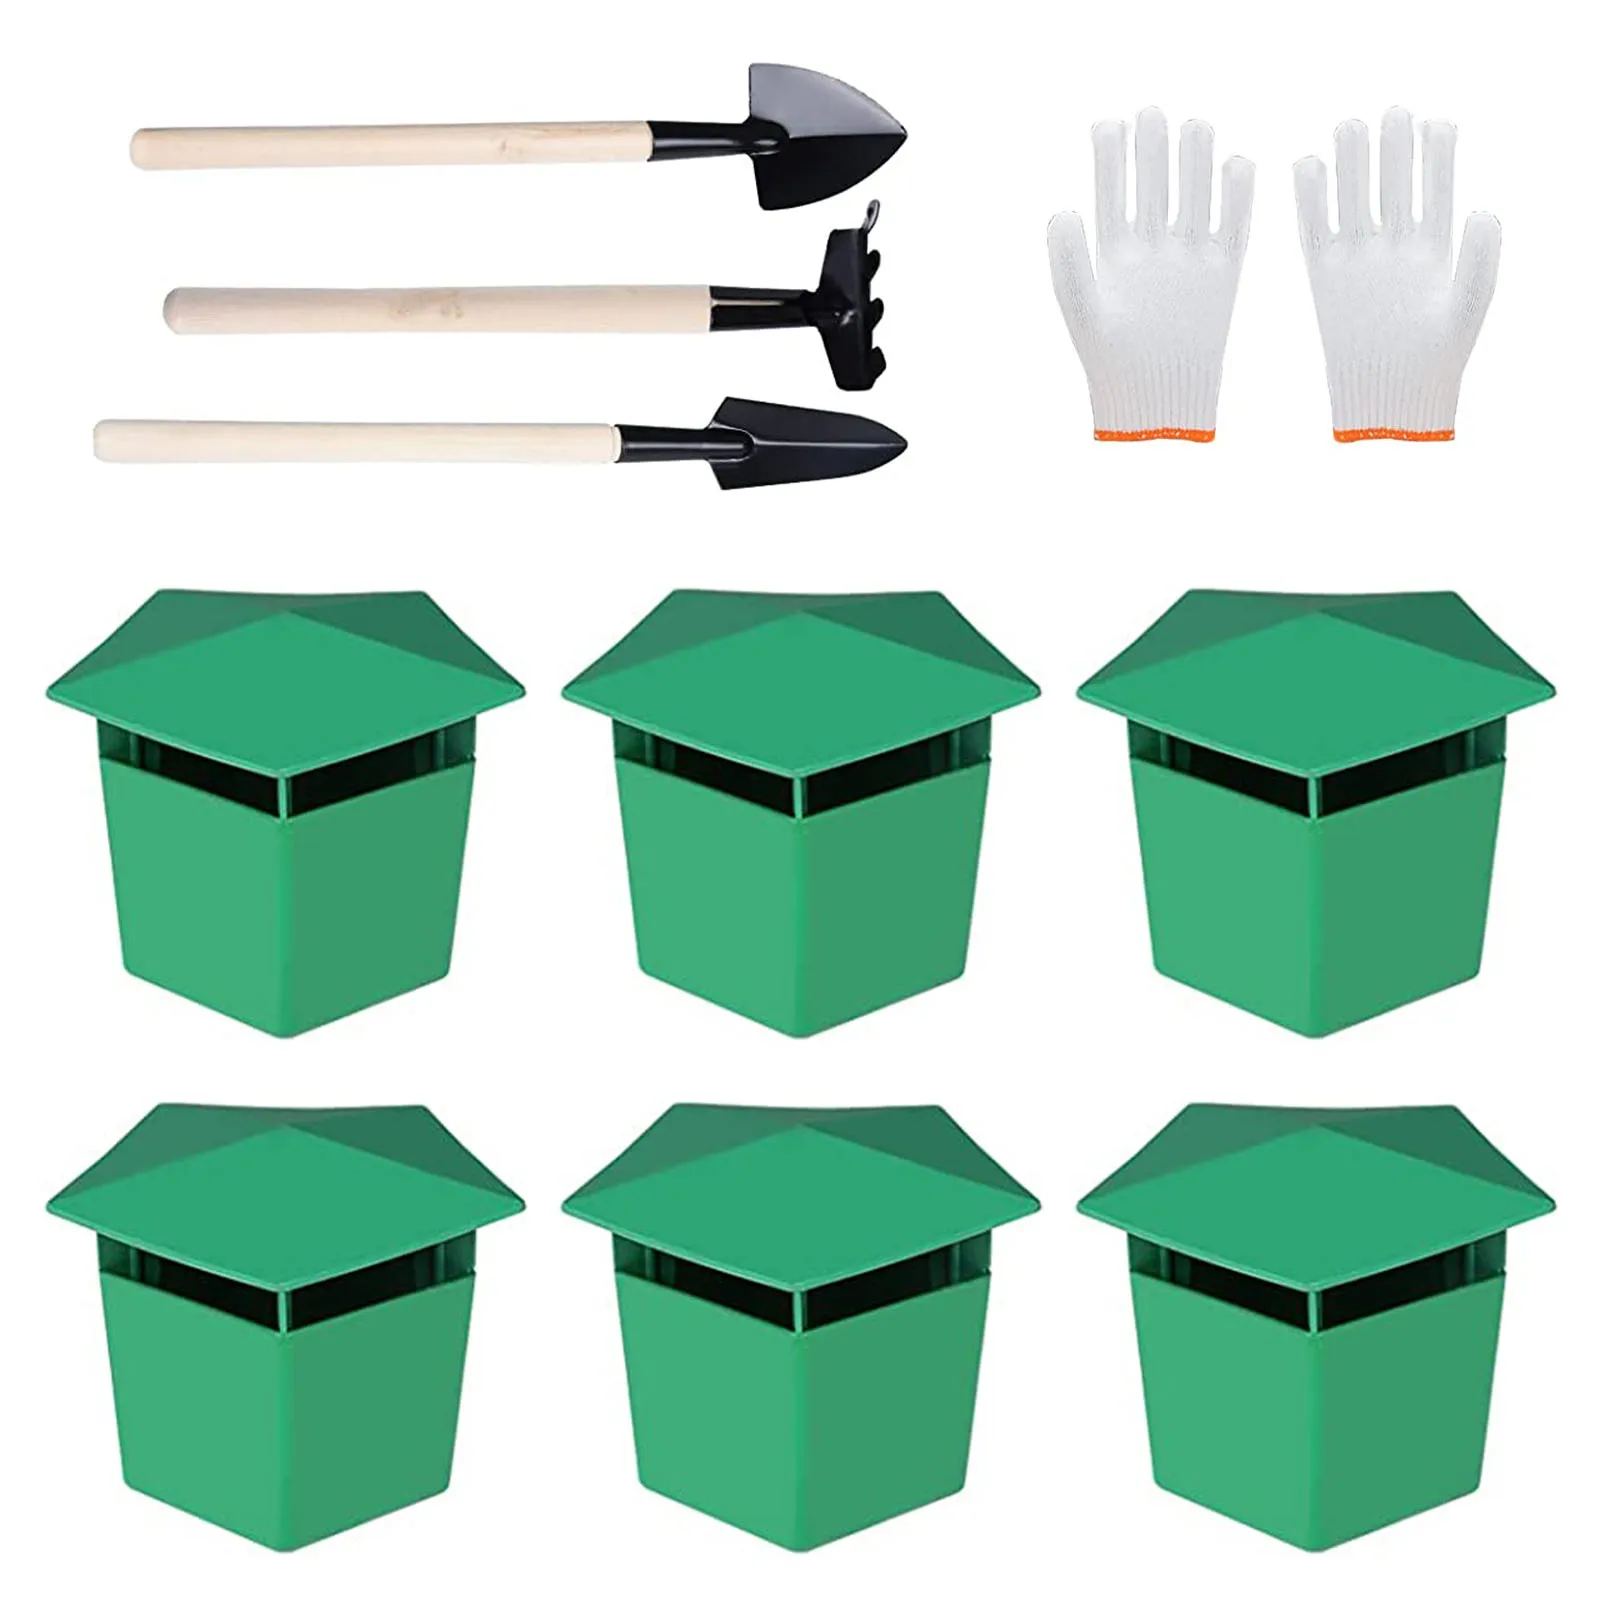 

6pcs Snail Trap Set Snail And Slug Trap With Digging Tools And Gloves Eco-Friendly Snail Catcher Safe And Simple Way To Catch